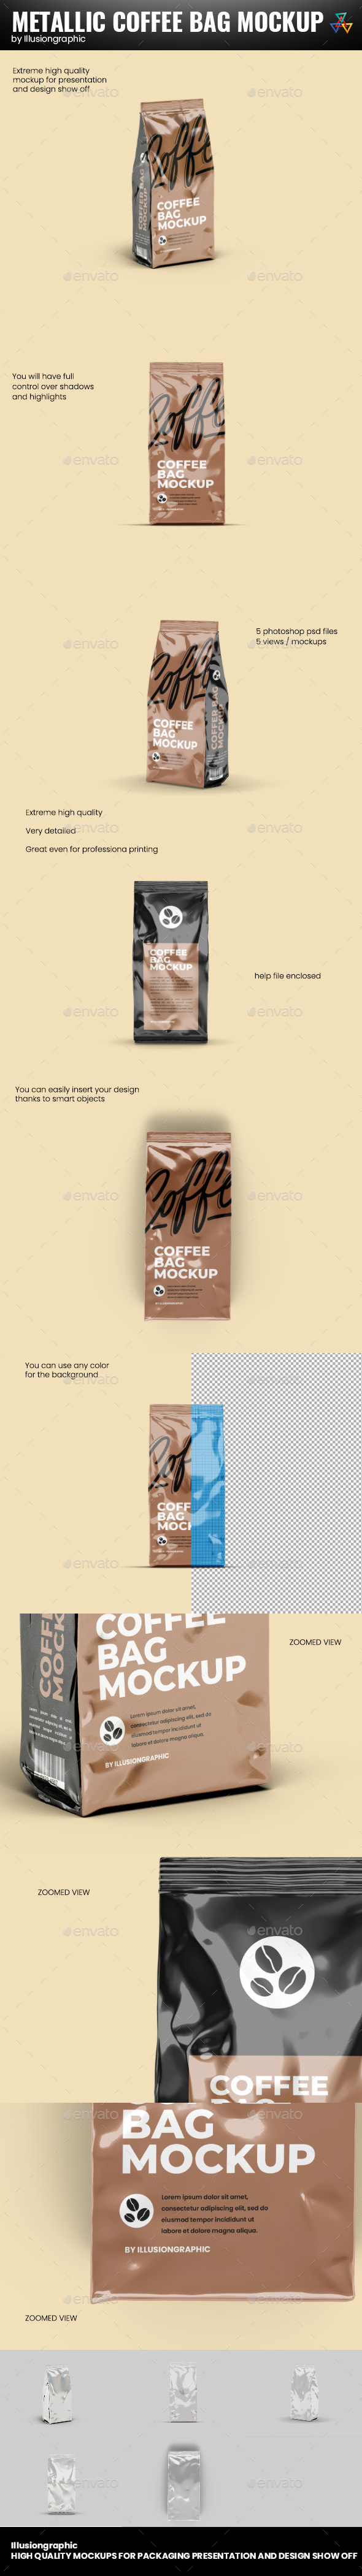 Download Metallic Coffee Bag Mockup By Illusiongraphic Graphicriver